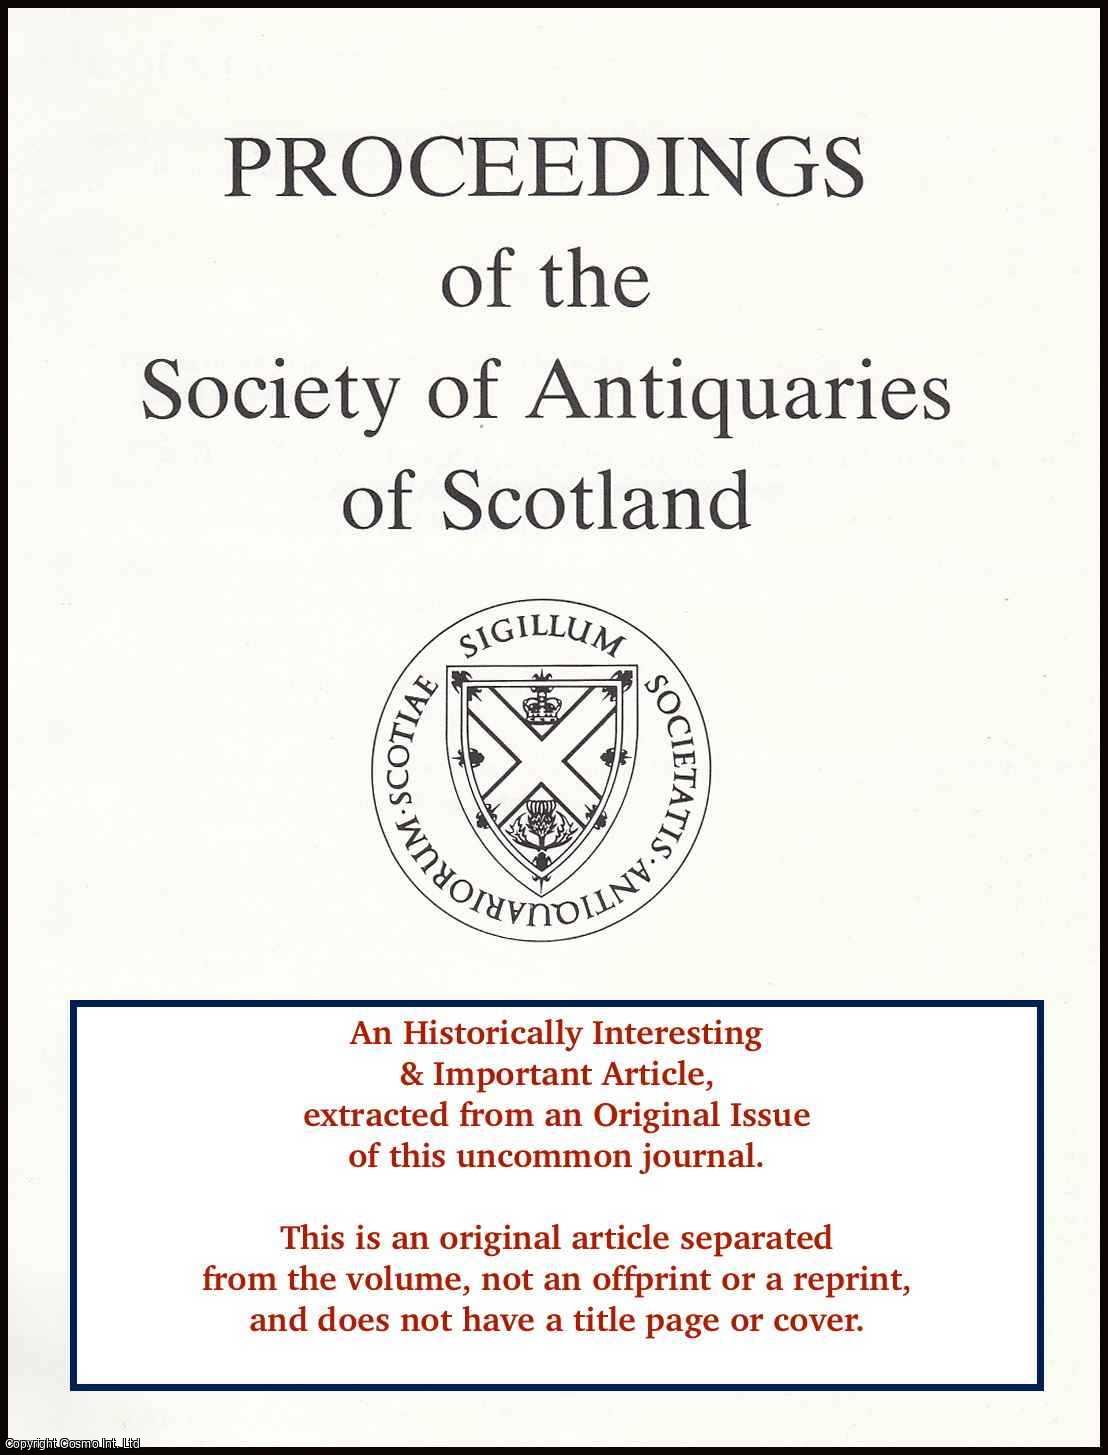 John A. Atkinson, E. Photos-Jones, J. Roberts, A. Rutherford & C. Smith - Excavation of 10th Century Burials at Chapelhall, Innellan, Argyll, 1994. An original article from the Proceedings of the Society of Antiquaries of Scotland, 2000.